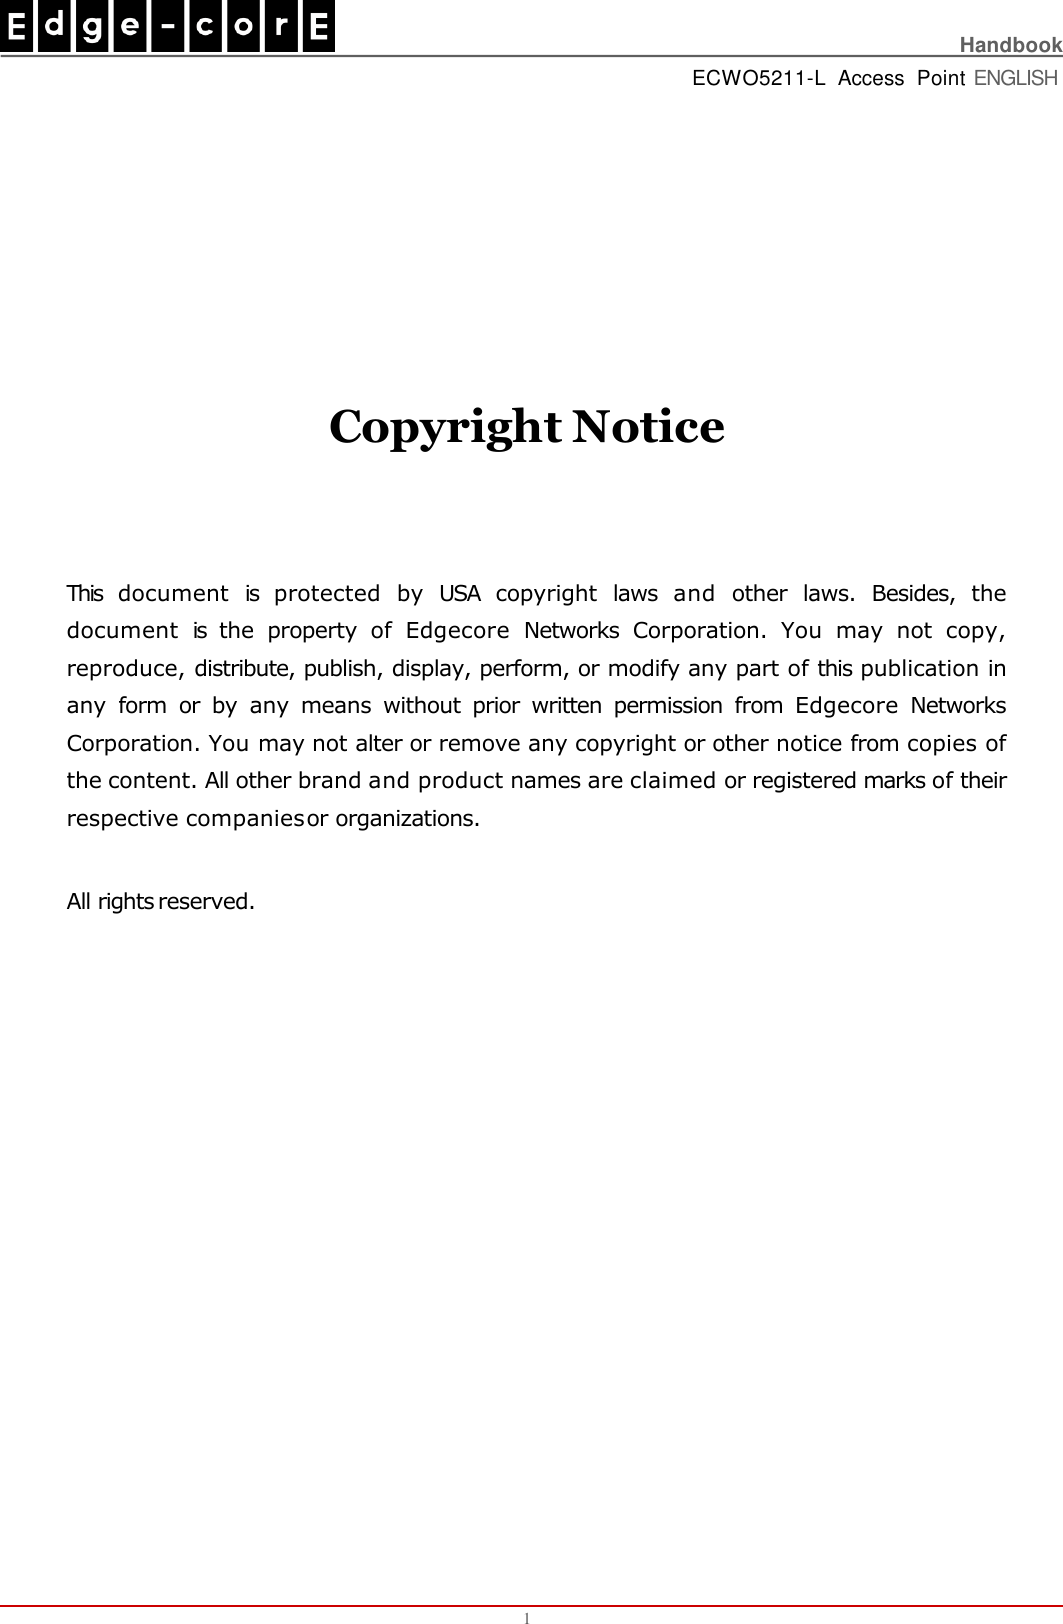    Handbook ECWO5211-L  Access  Point ENGLISH Copyright Notice 1 This  document  is  protected  by  USA  copyright  laws  and  other  laws.  Besides,  the  document  is  the  property  of  Edgecore  Networks  Corporation.  You  may  not  copy,  reproduce, distribute, publish, display, perform, or modify any part of this publication in  any  form  or by  any  means  without  prior  written  permission  from  Edgecore  Networks  Corporation. You may not alter or remove any copyright or other notice from copies of  the content. All other brand and product names are claimed or registered marks of their  respective companies or organizations.  All rights reserved. 